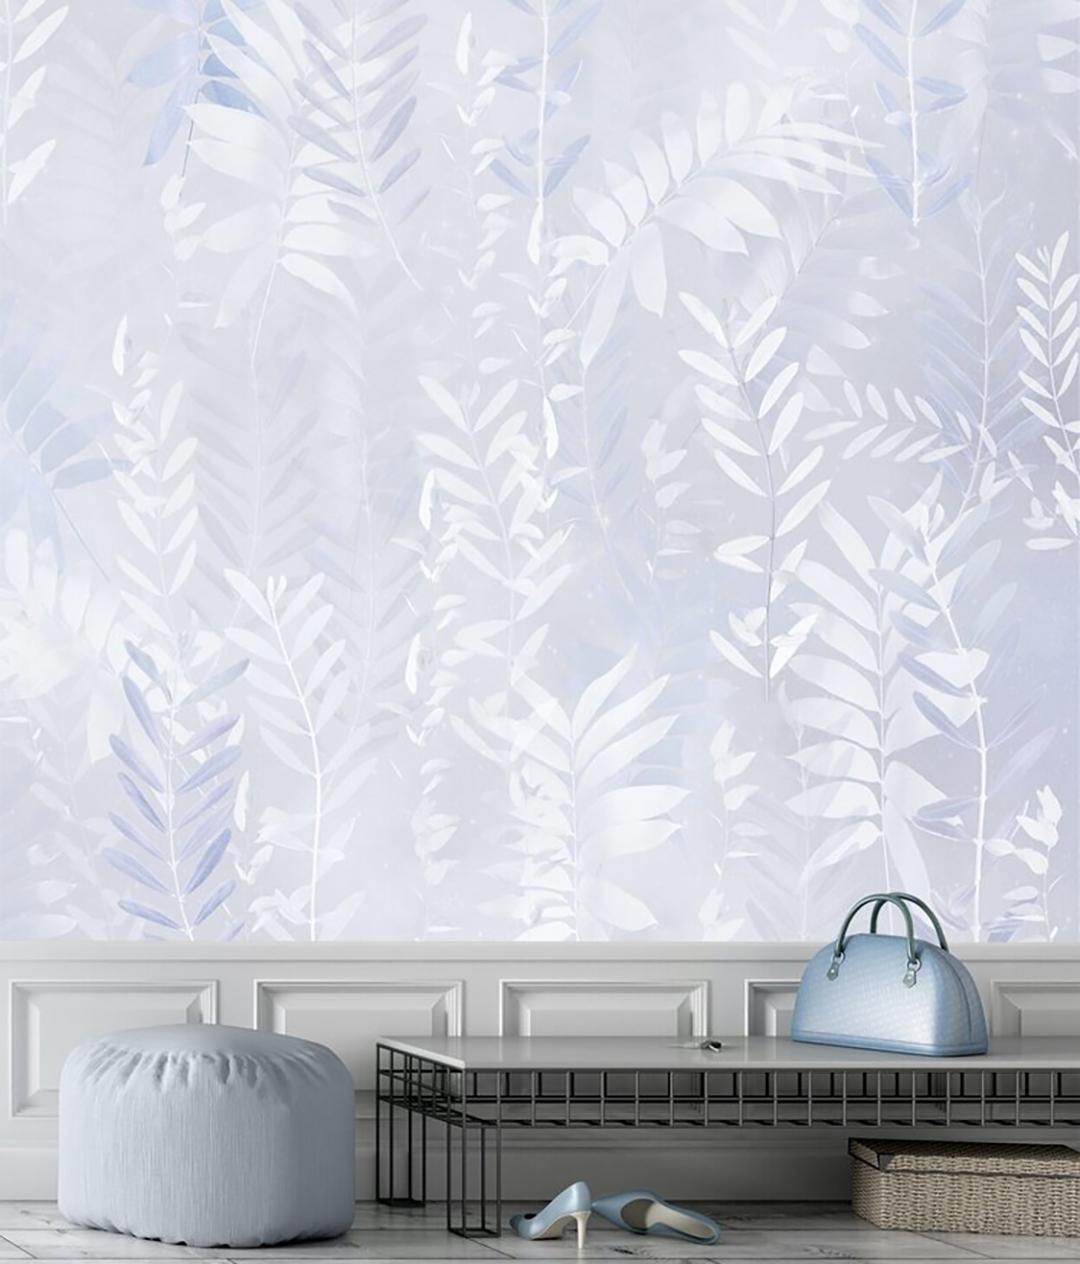 Ferngully Wallcovering by EDGE Collections.

As we move into unchartered territories with the world around us, we sought to create a collection with strong, positive symbolization. The Maori people believe Ferns represent new life and new